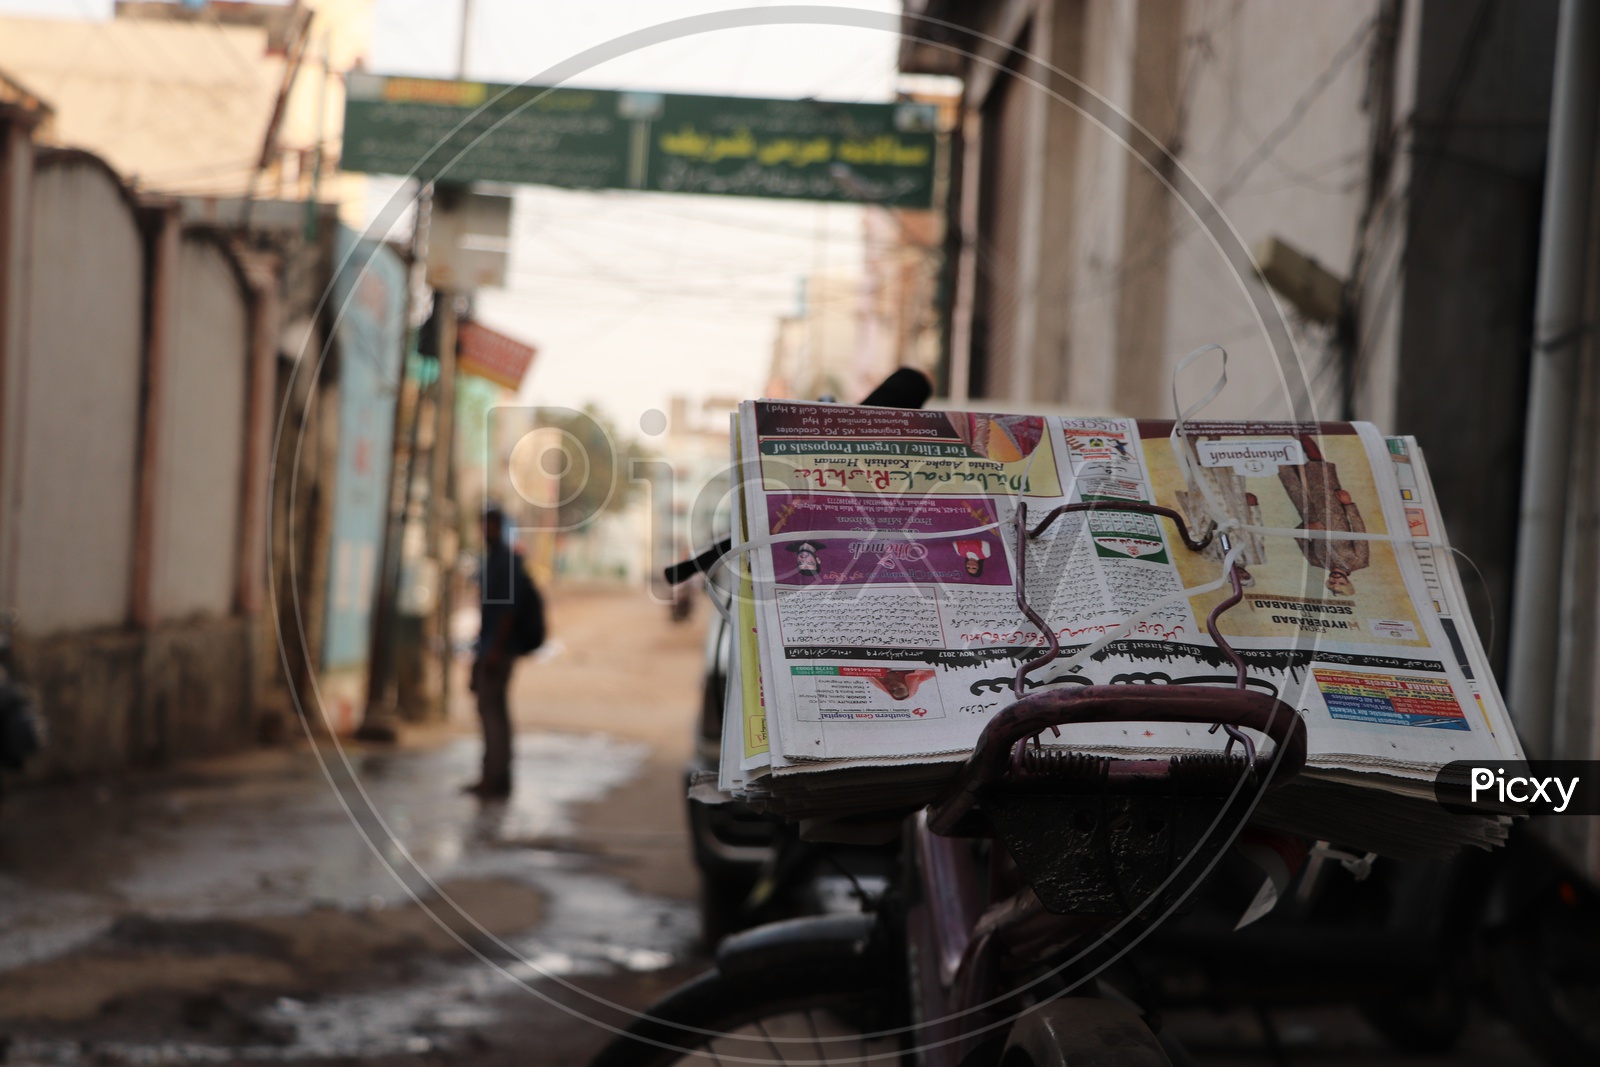 Daily Urdu Newspaper On a Cycle Back Of a Paperboy Around The Streets of Charminar